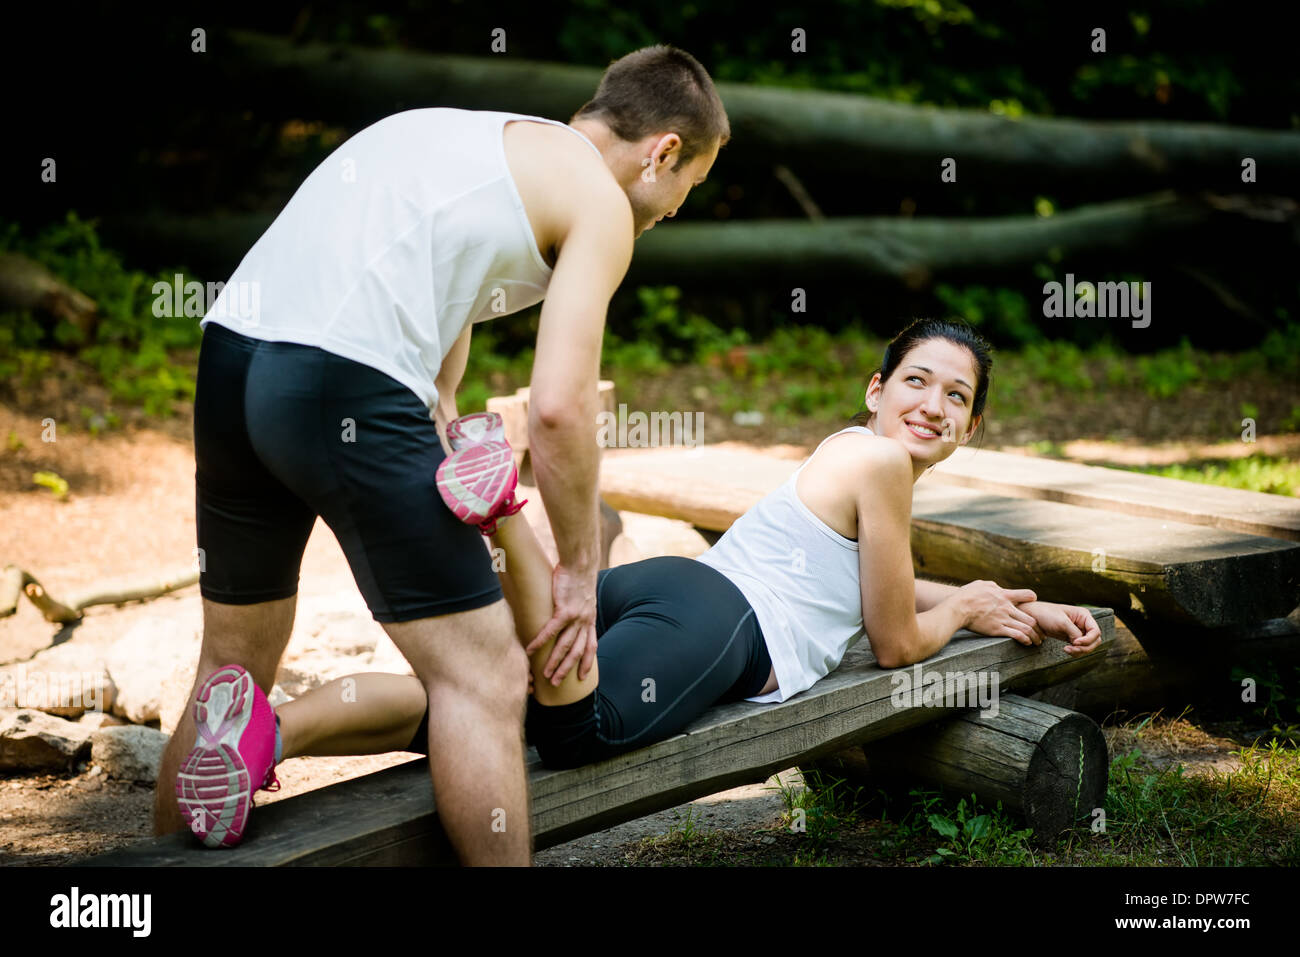 Man gives massage of calf to young woman after jogging Stock Photo